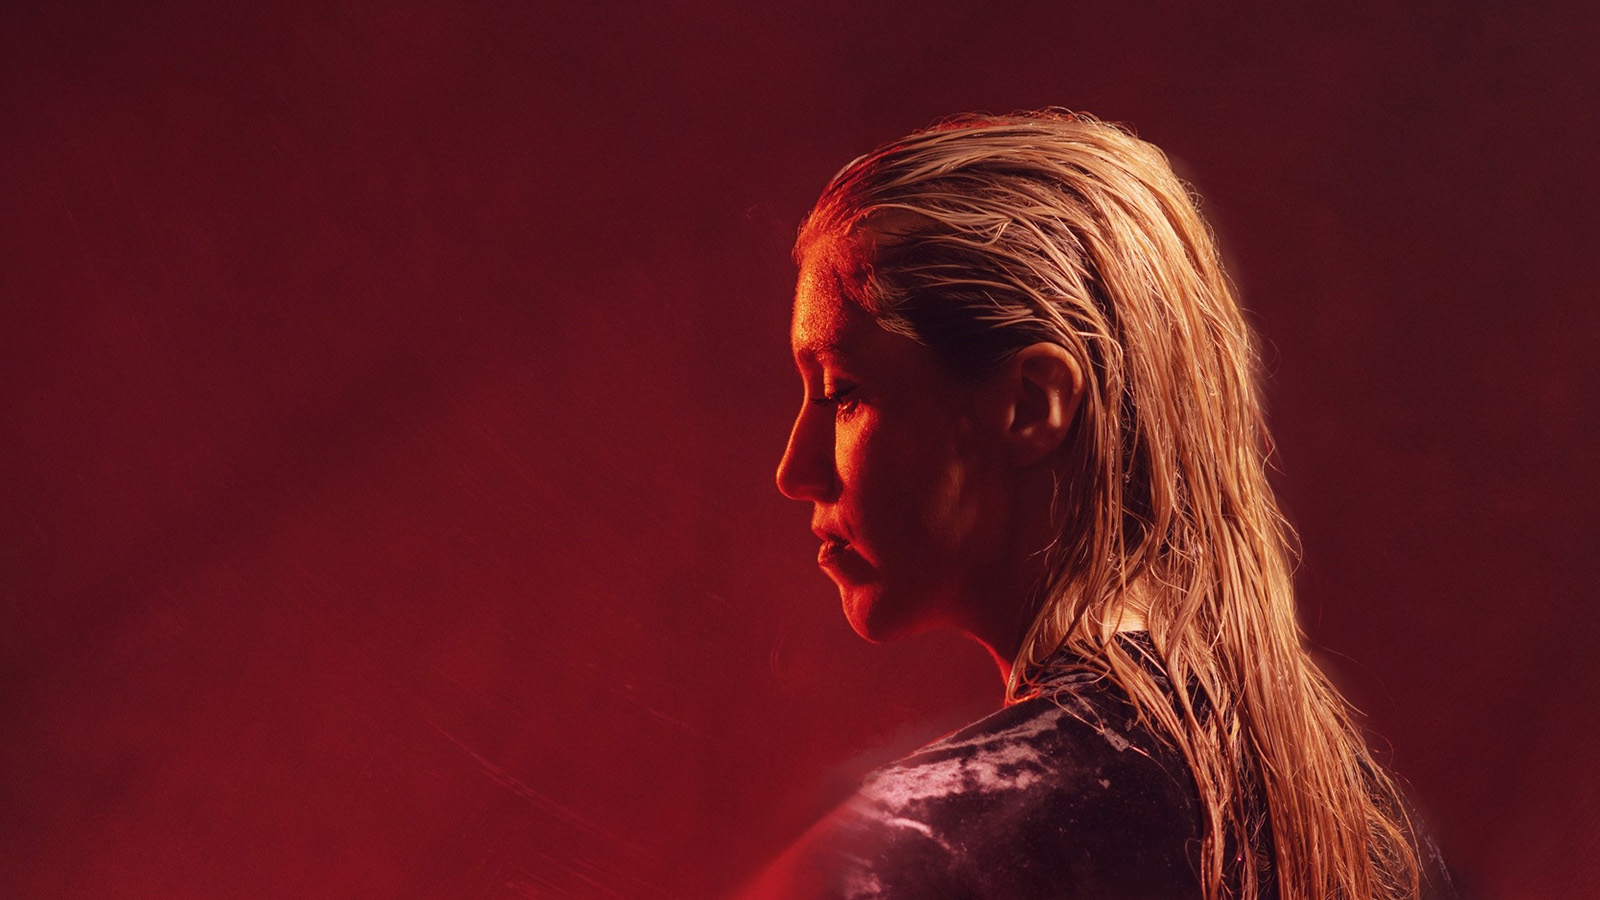 A woman (Imogen Stirling) with blonde hair caught in profile and lit in dramatic red light